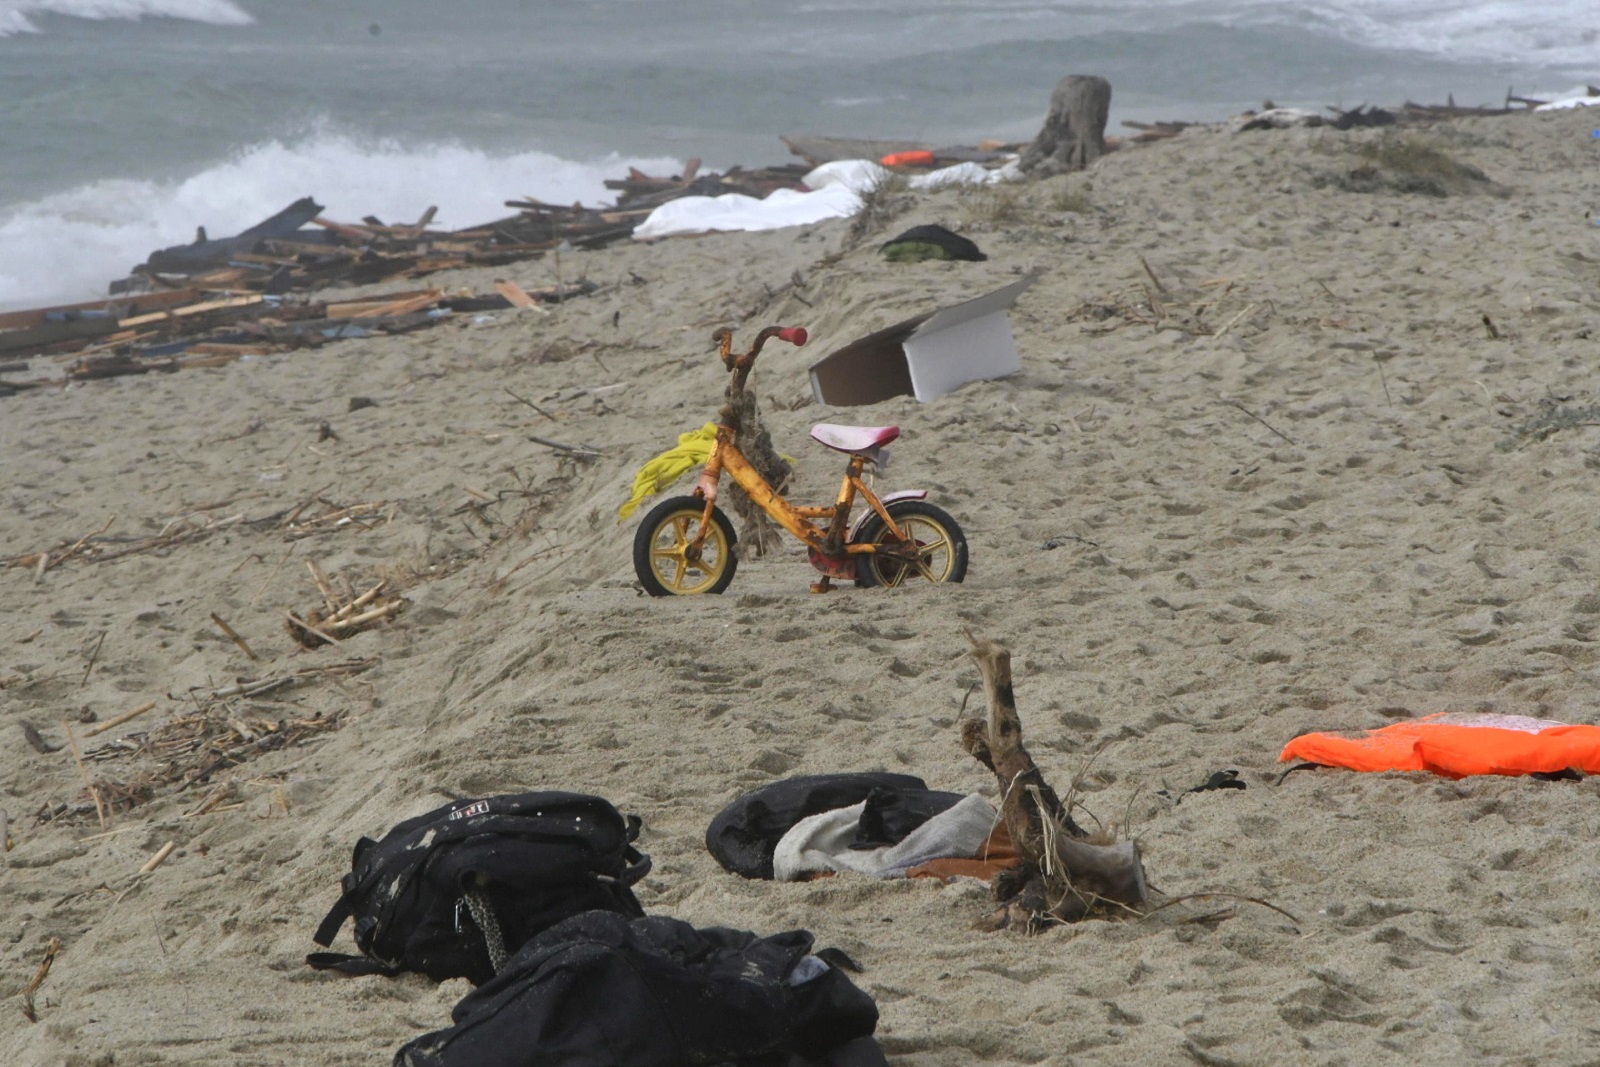 epa10491828 Debris, among them a bicycle for children, washed ashore at a beach near Cutro, Crotone province, southern Italy, 26 February 2023. Italian authorities said on 26 February that at least 30 bodies were found on the beach and in the sea near Crotone, in the southern Italian region of Calabria, after a boat carrying migrants sank in rough seas near the coast. About forty people survived the accident, Italian firefighters added. Authorities fear the death toll will climb as rescuers look for survivors.  EPA/GIUSEPPE PIPITA